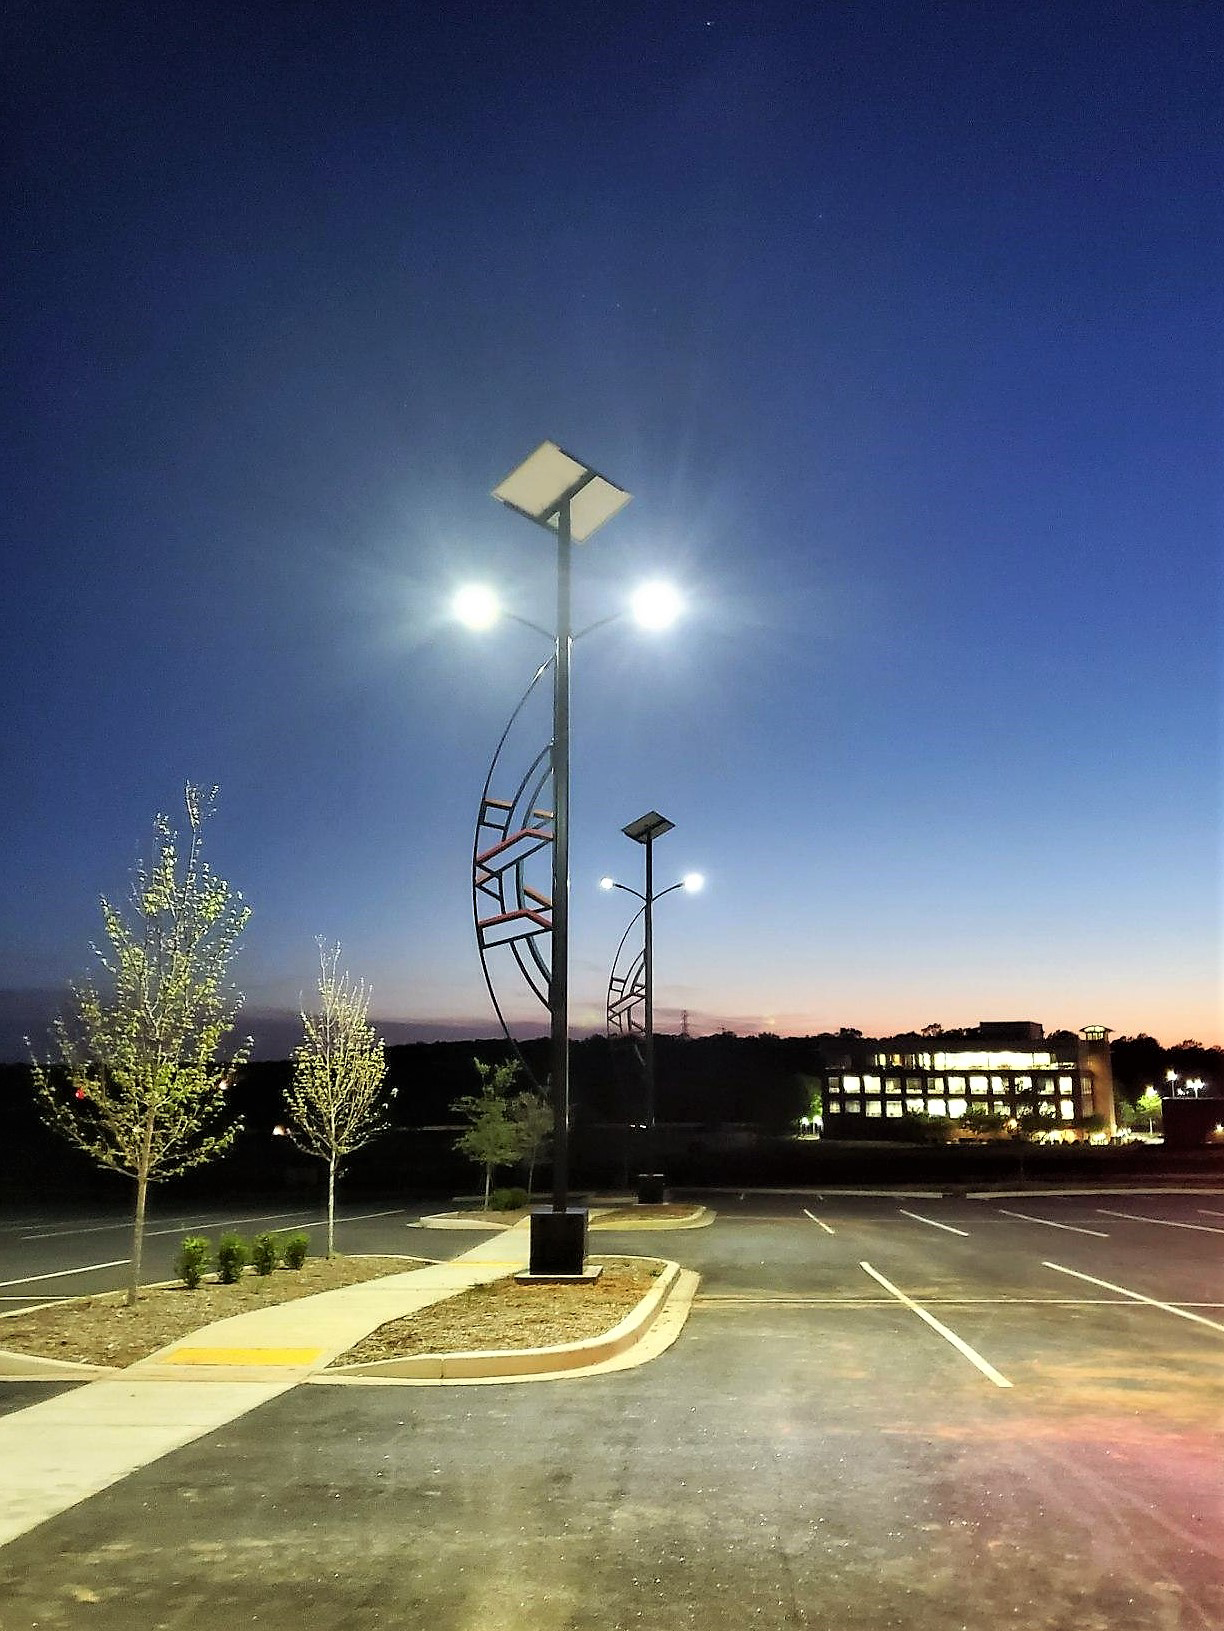 two solar powered parking lot lights with their lights illuminating the parking lot at night